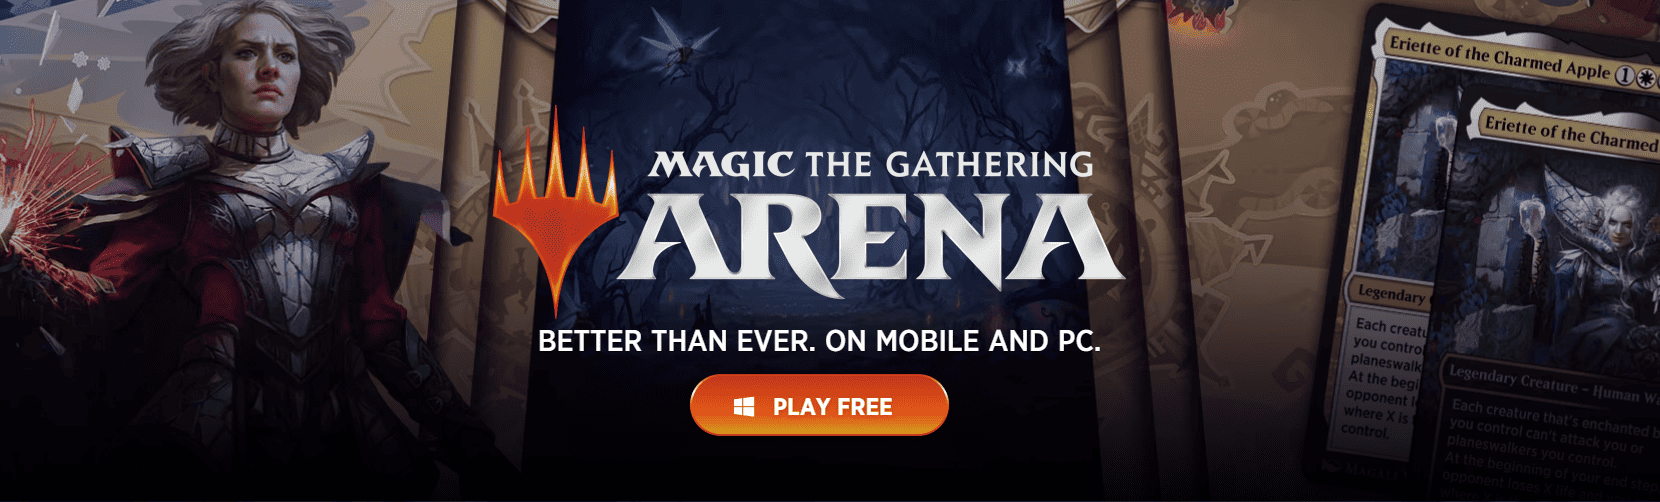 picture of the download screen for mtg arena from the Wizards of the Coast website.